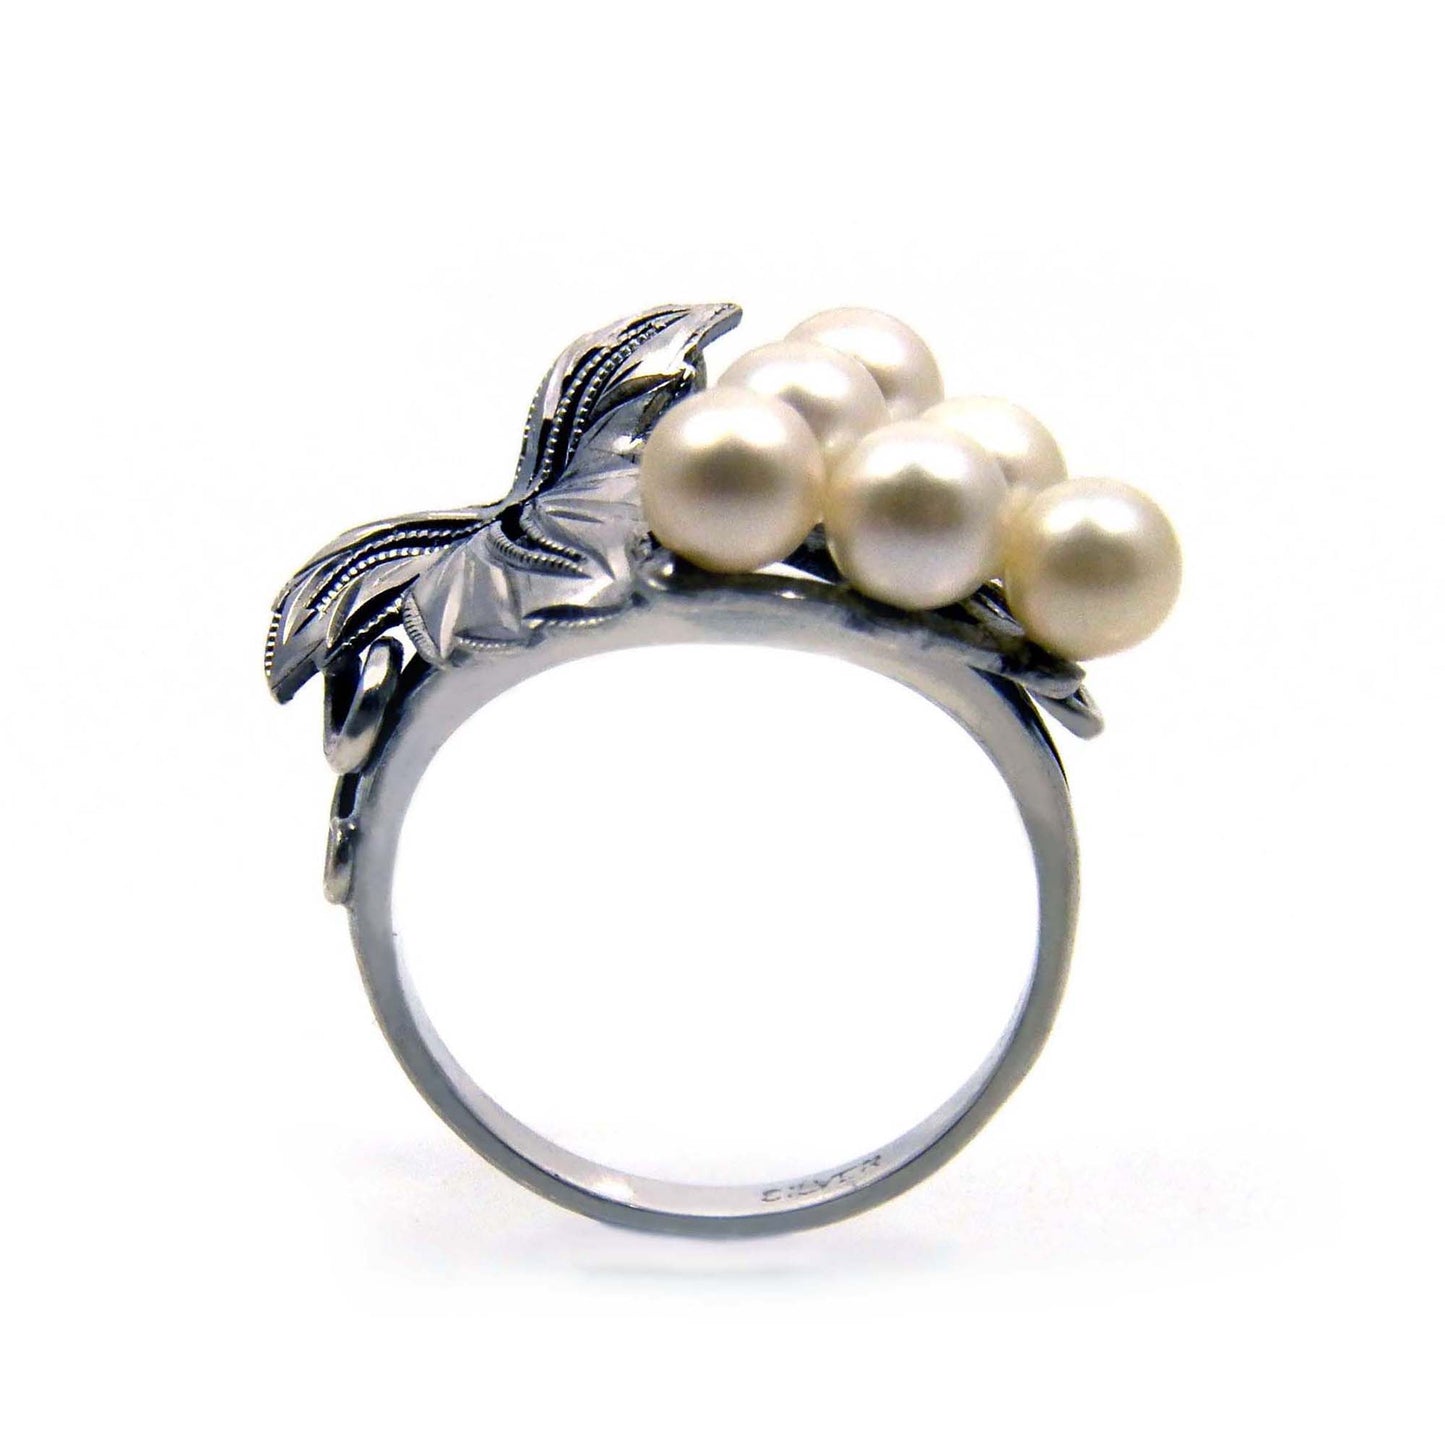 Bunch of Grapes Akoya Pearl Ring, Sterling Silver Art Deco Japanese Jewelry 1930s